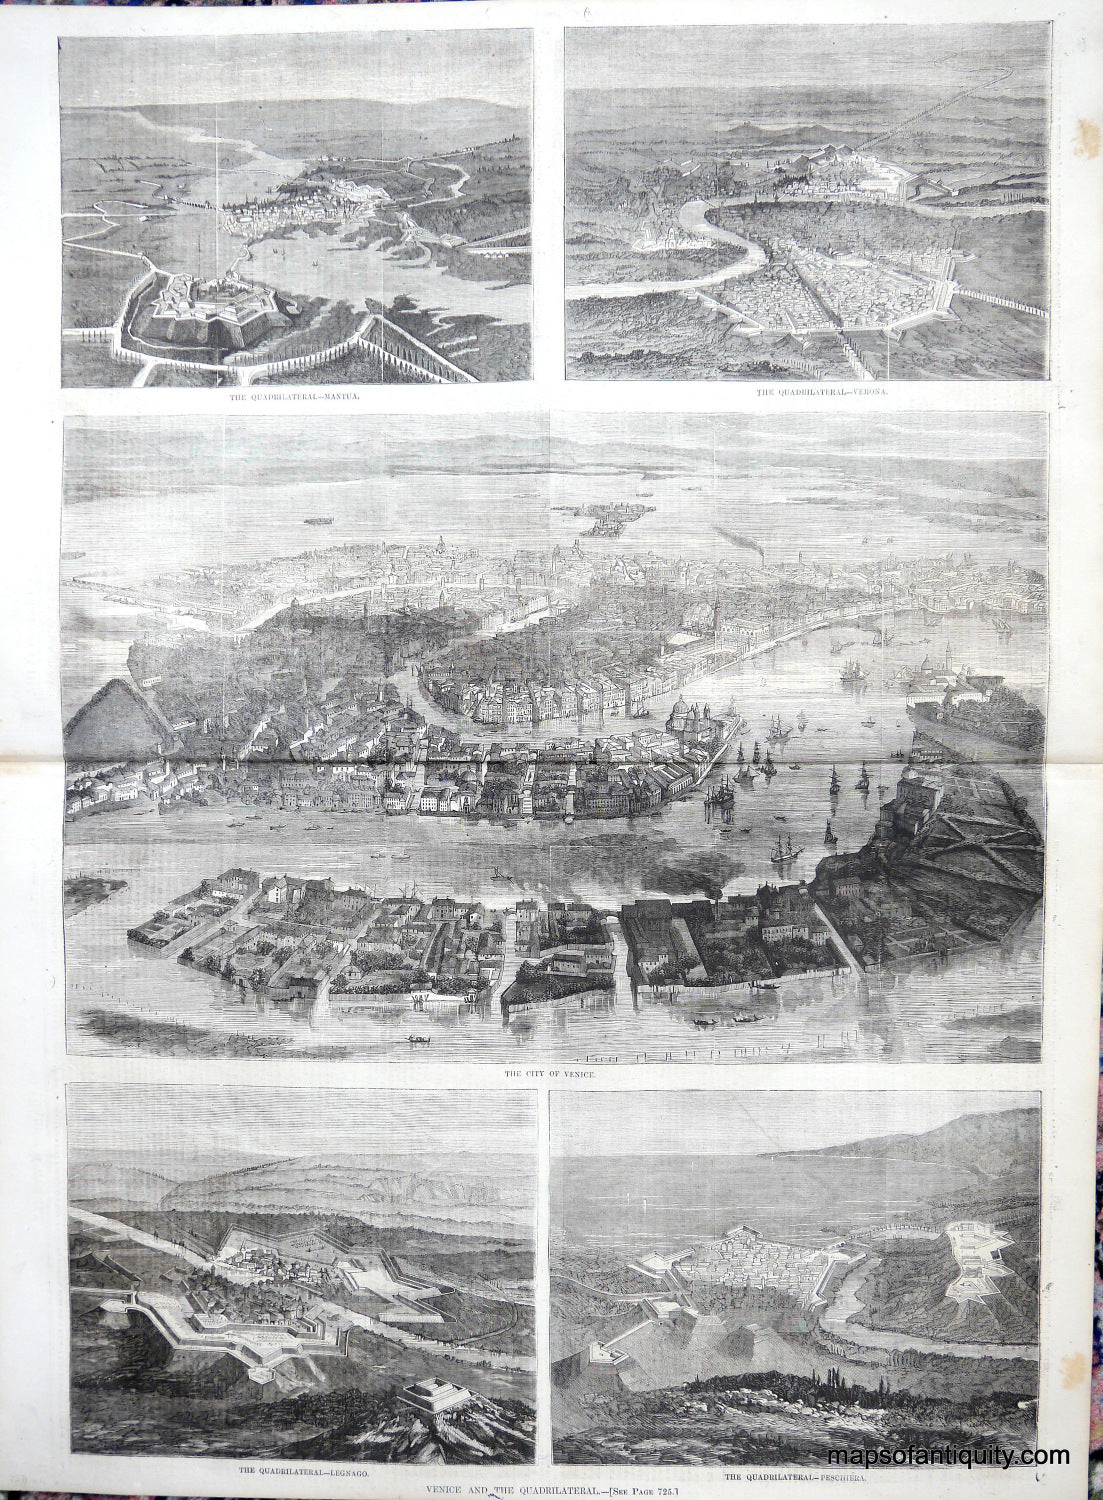 Antique-Black-and-White-City-Views-Venice-and-the-Quadrilateral.-Europe-Italy-1866-Harper's-Weekly-Maps-Of-Antiquity